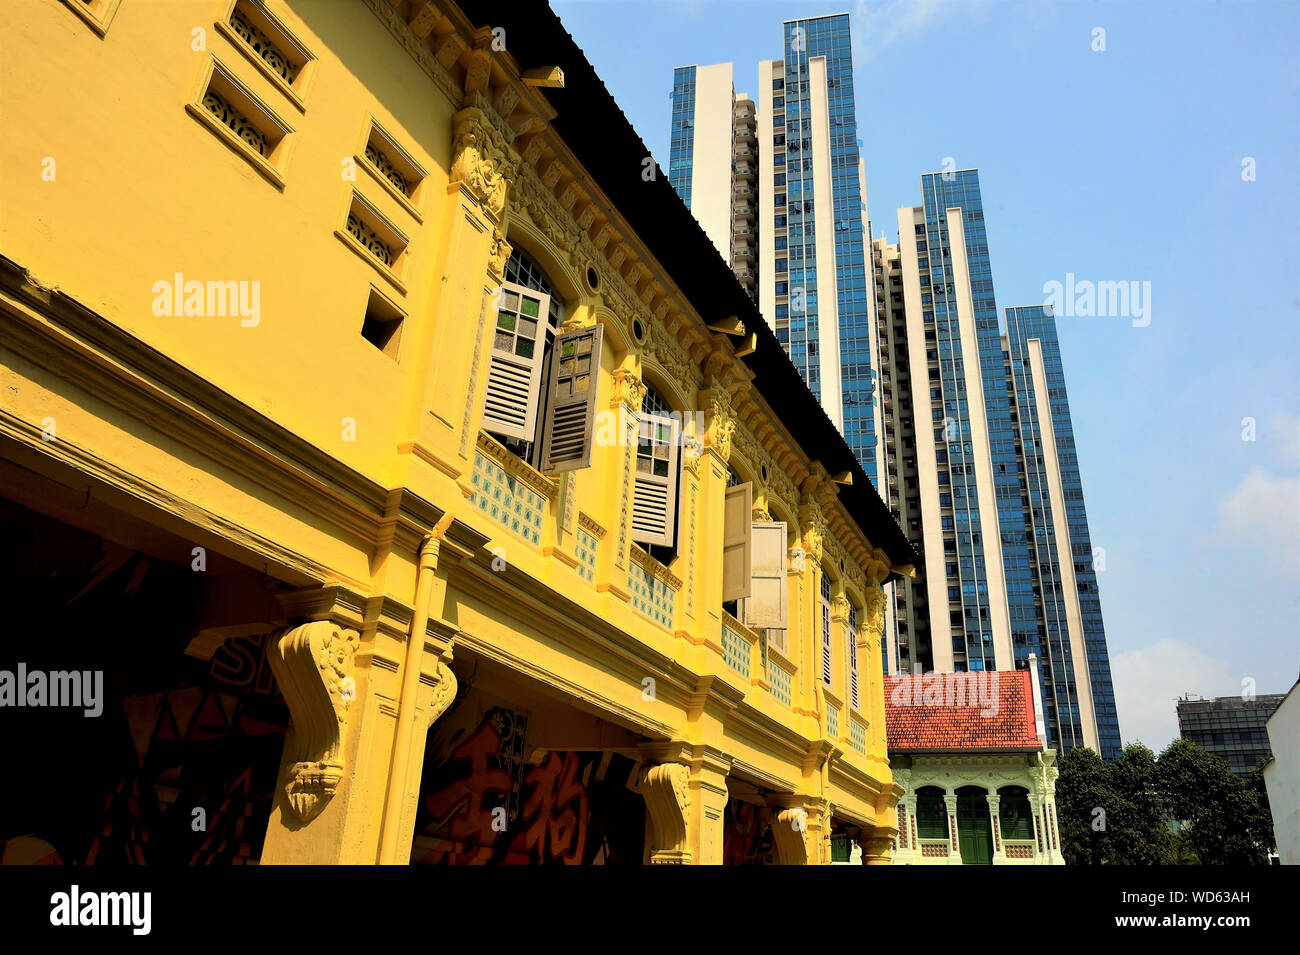 Perspective view of colourful old Singapore shophouses with background of modern apartment towers in historic Jalan Besar Stock Photo